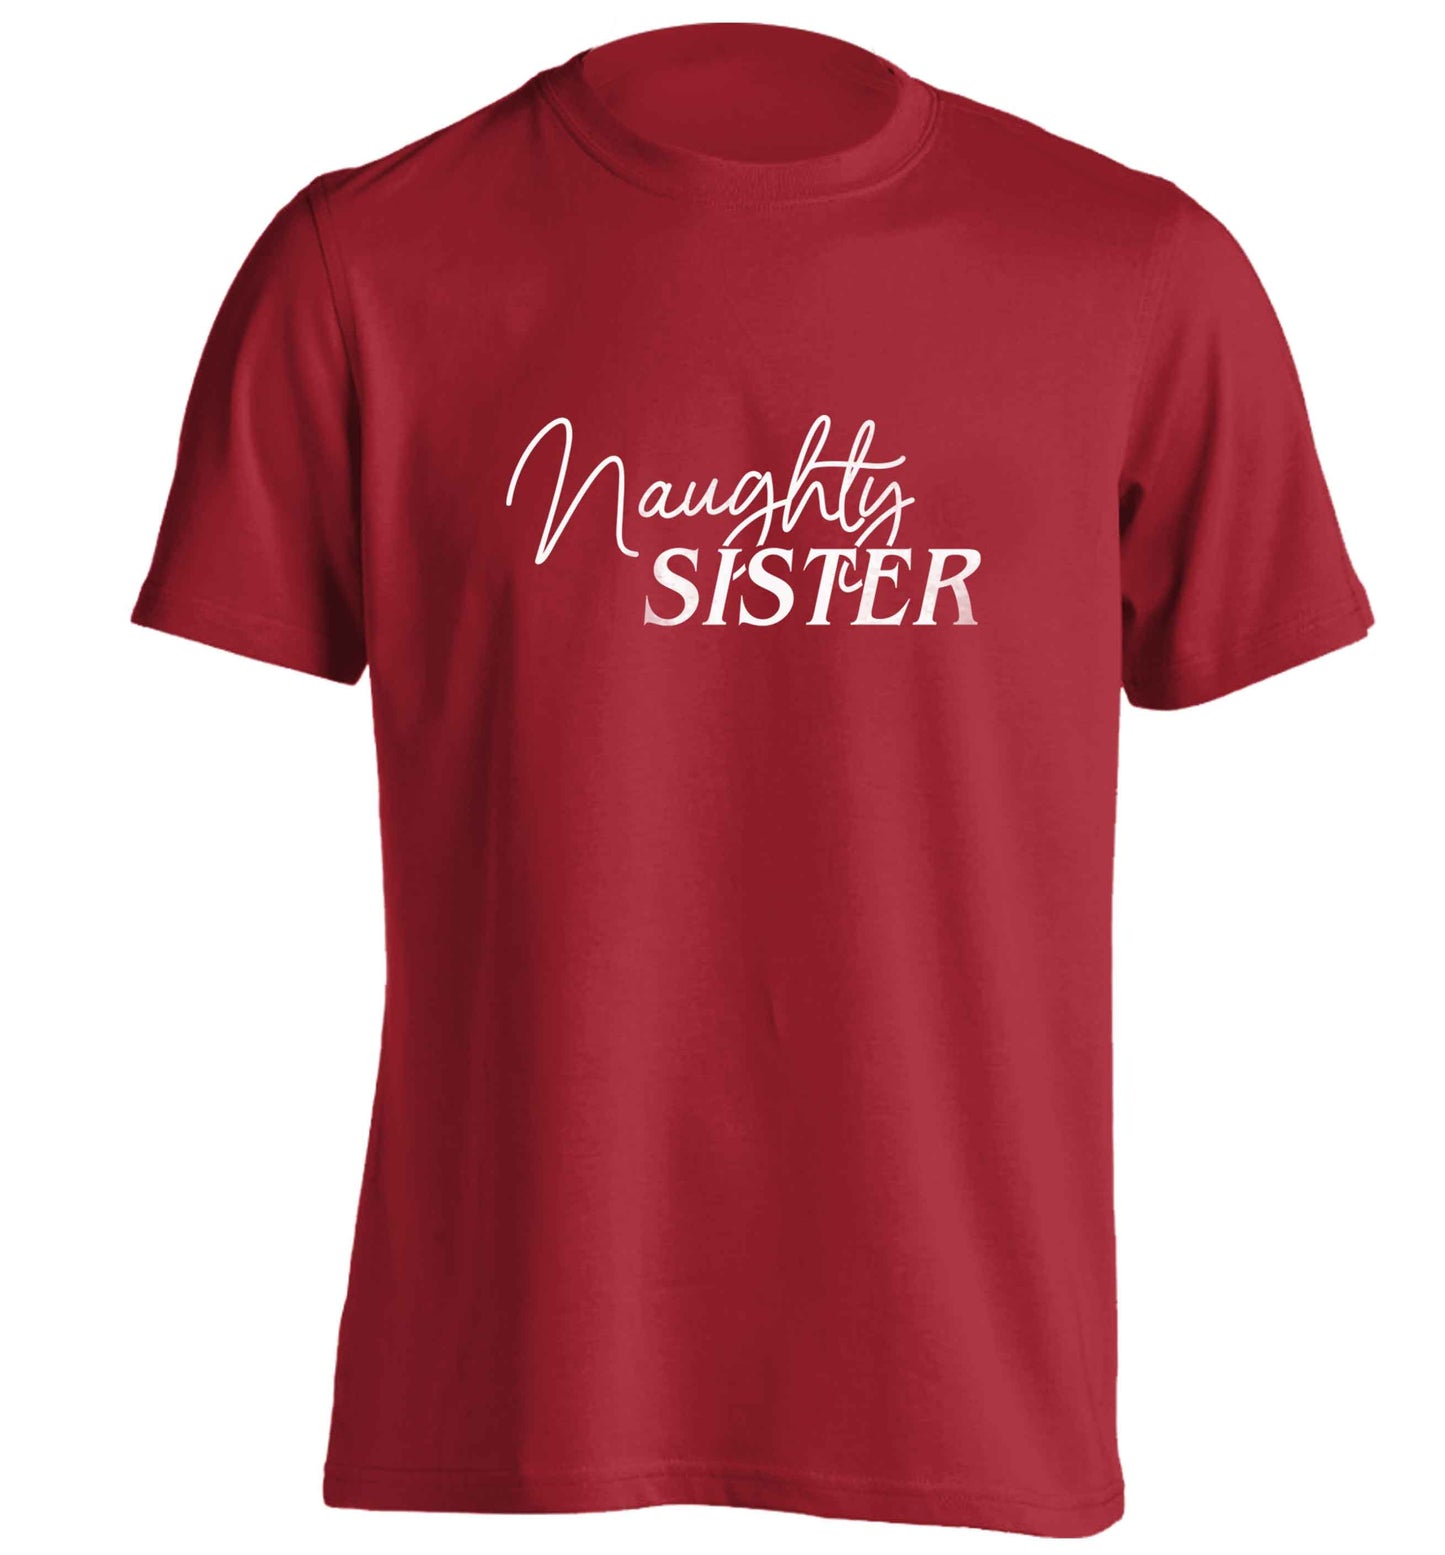 Naughty Sister adults unisex red Tshirt 2XL